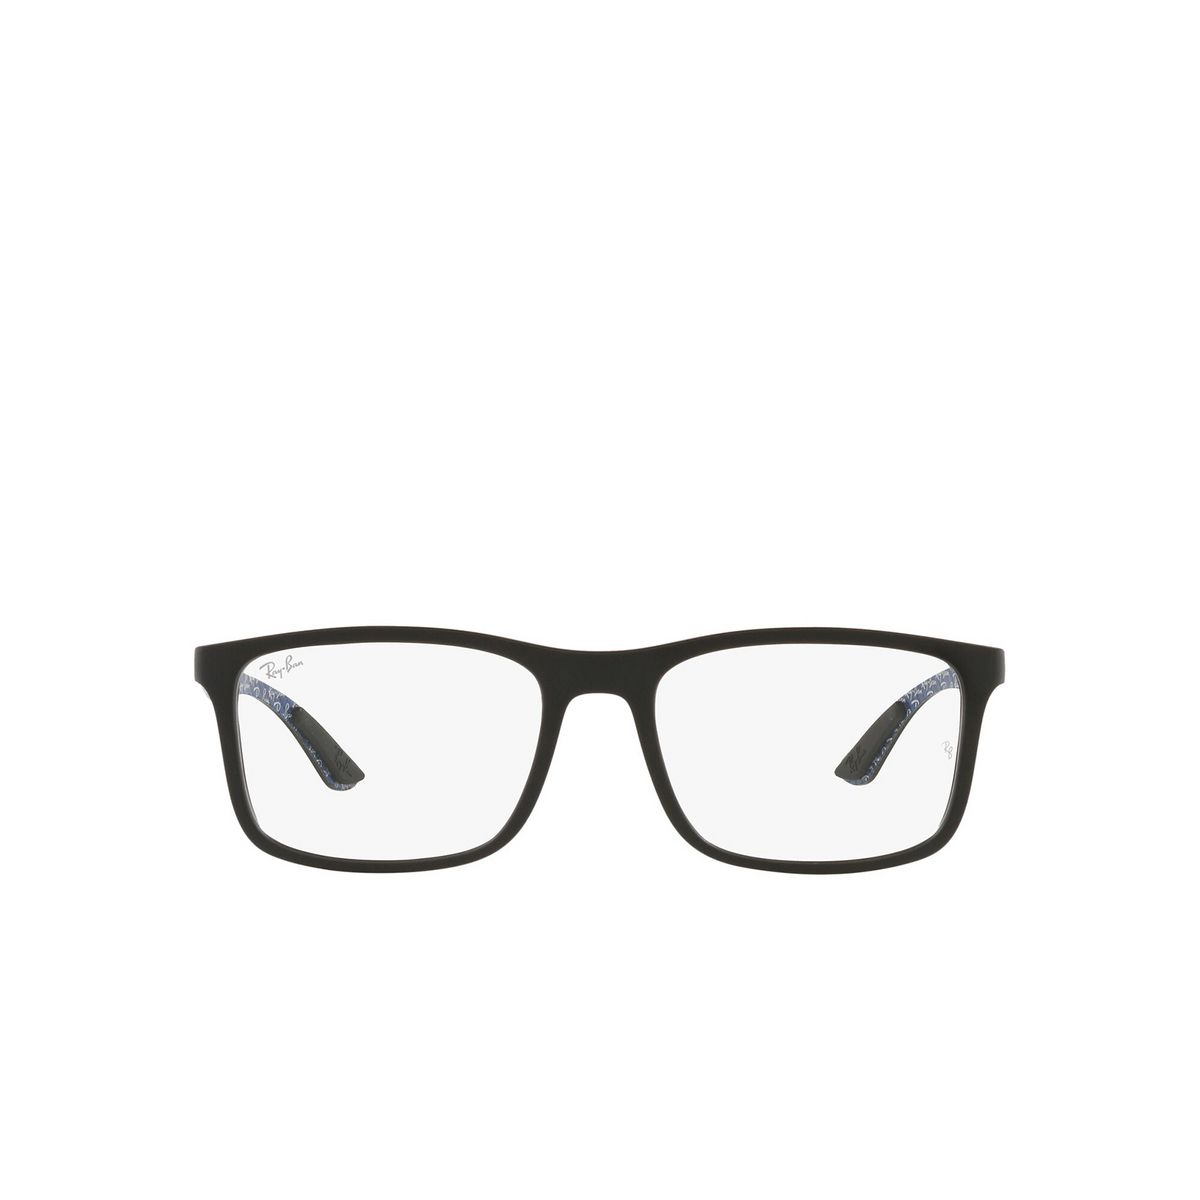 Ray-Ban® Rectangle Eyeglasses: RX8908 color Matte Black 5196 - front view.